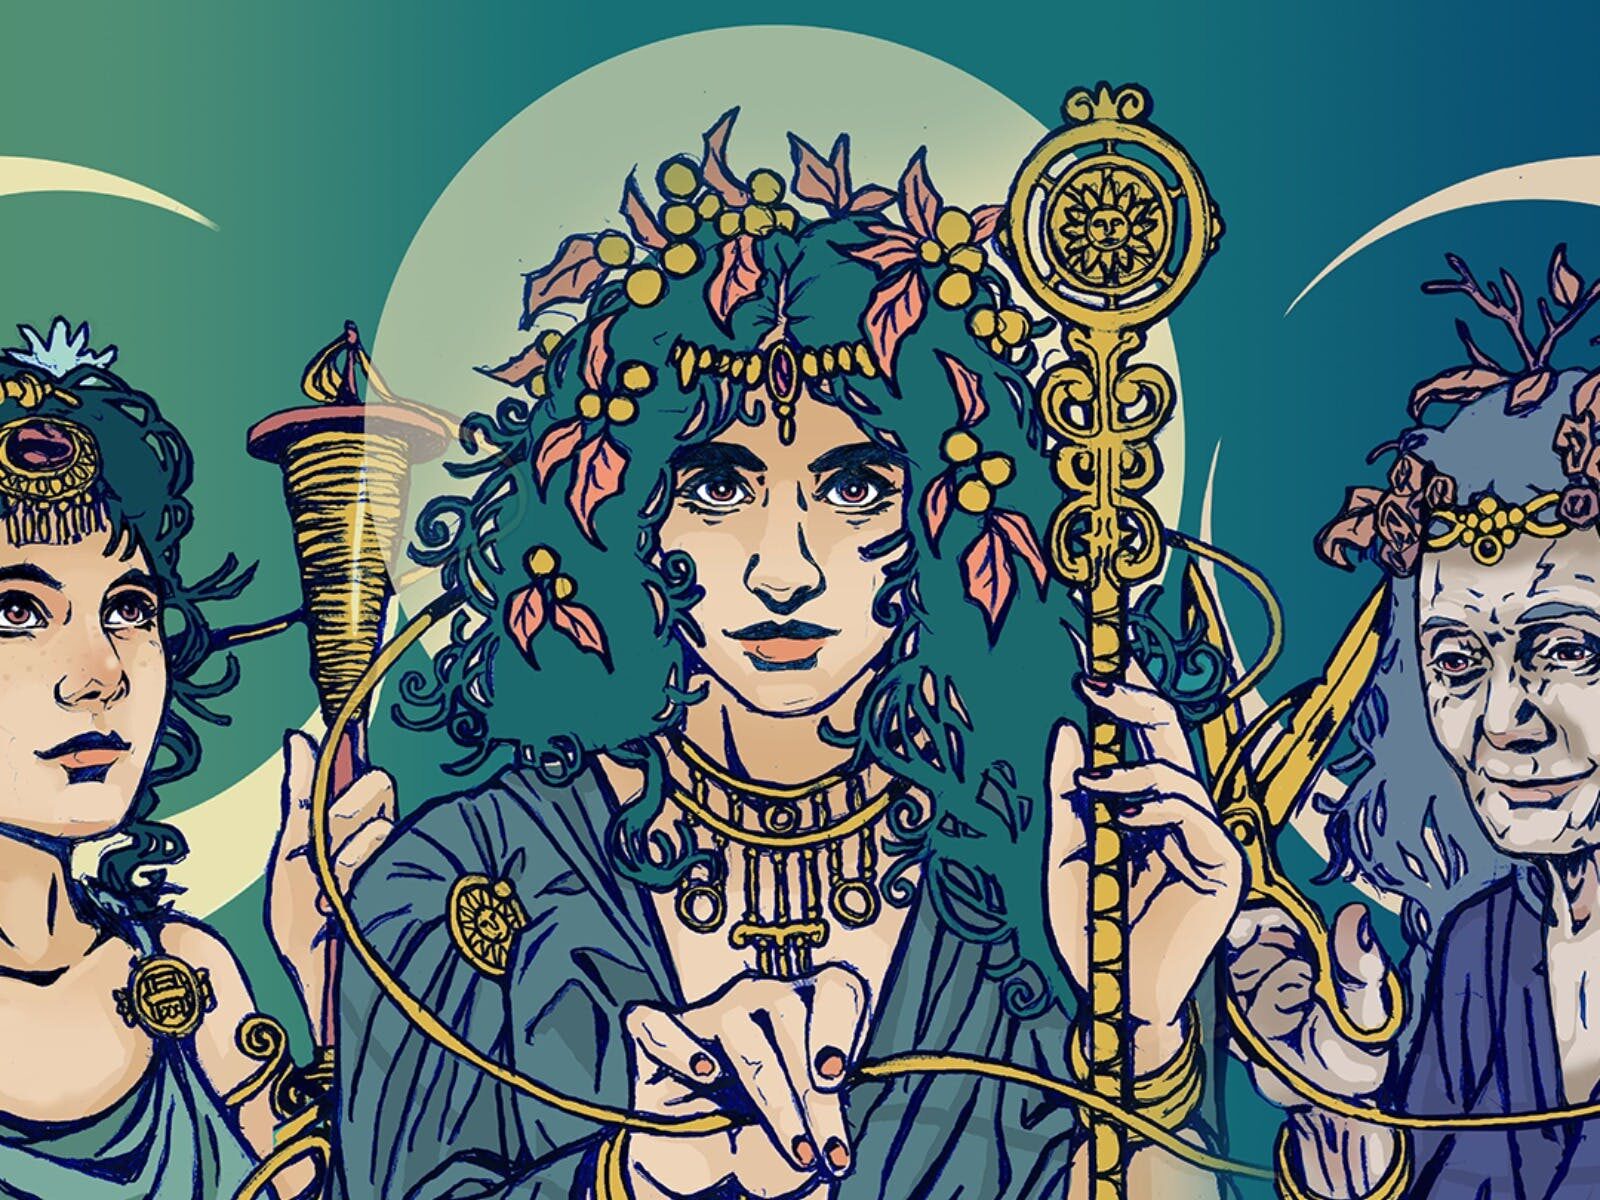 An illustrated depiction of the three Moirai sisters on a blue green background